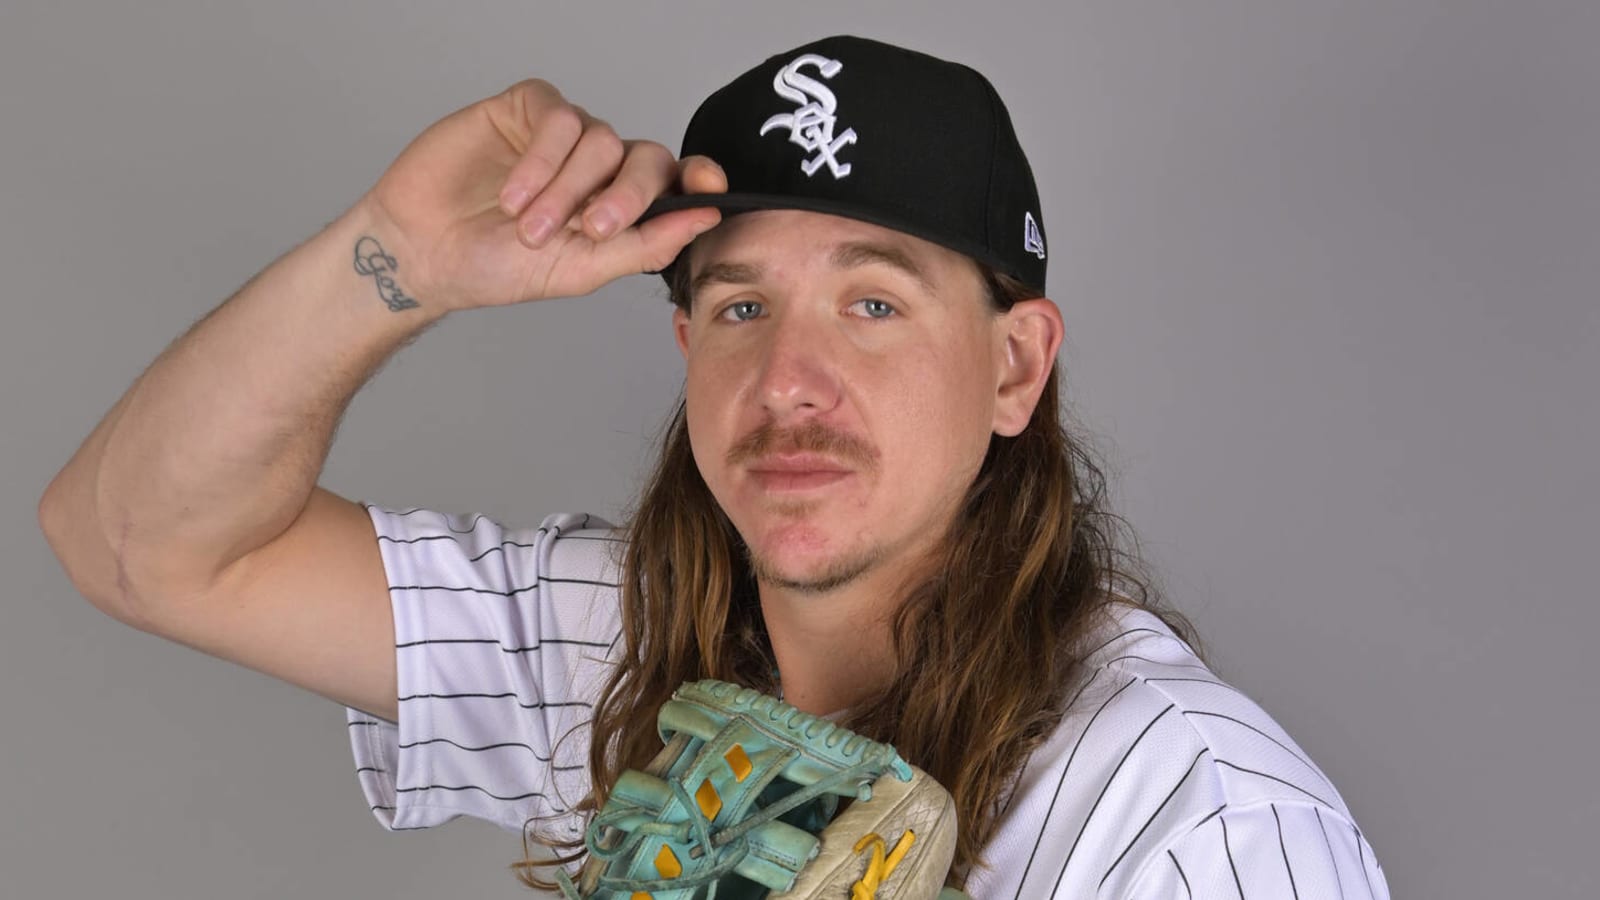 White Sox's Clevinger will not face discipline after investigation